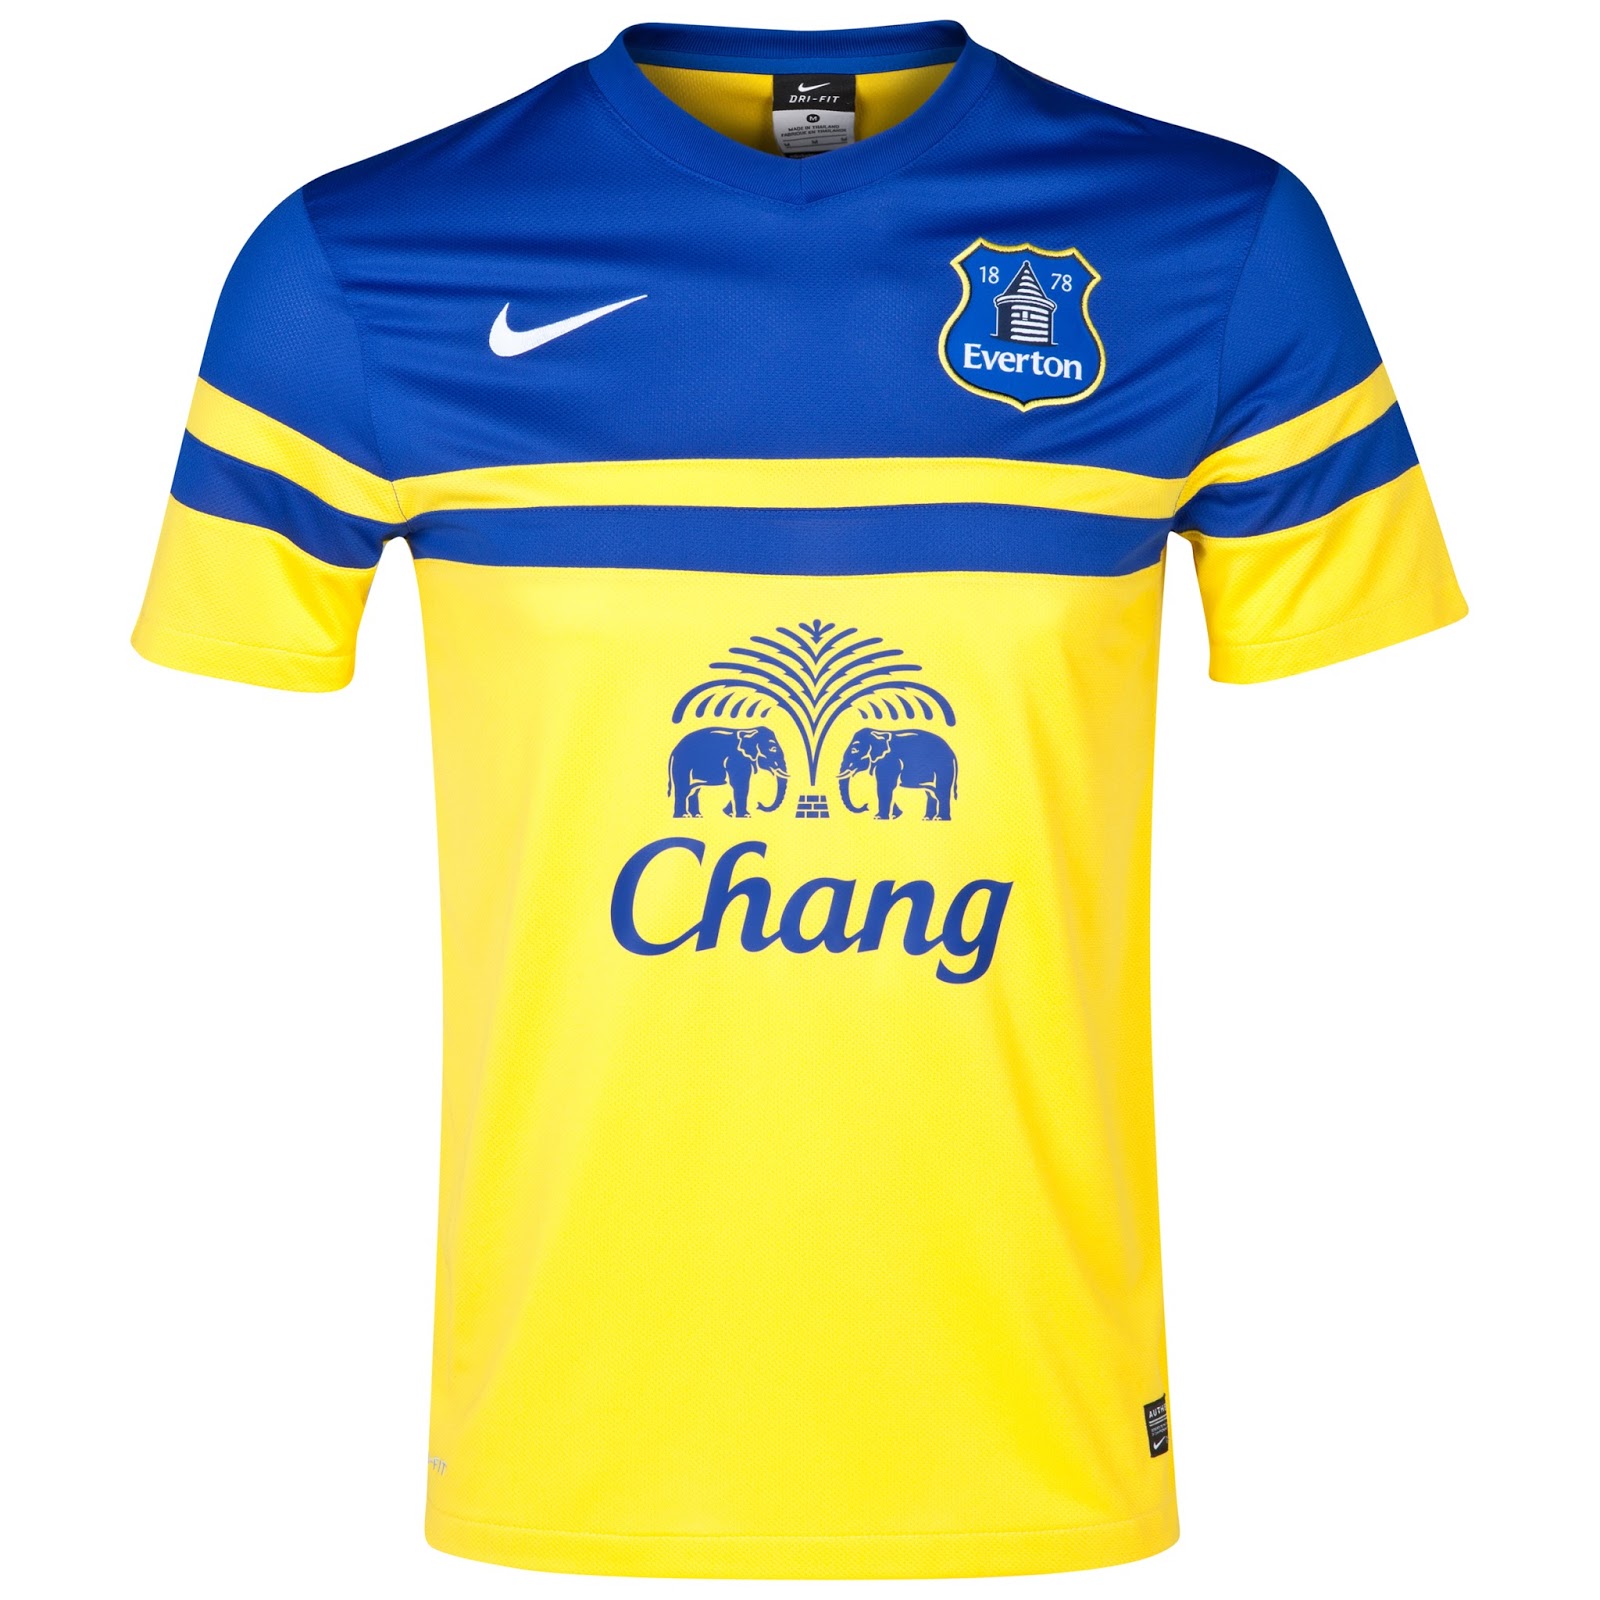 Everton 13-14 (2013-14) Home and Away Kits Released - Footy Headlines